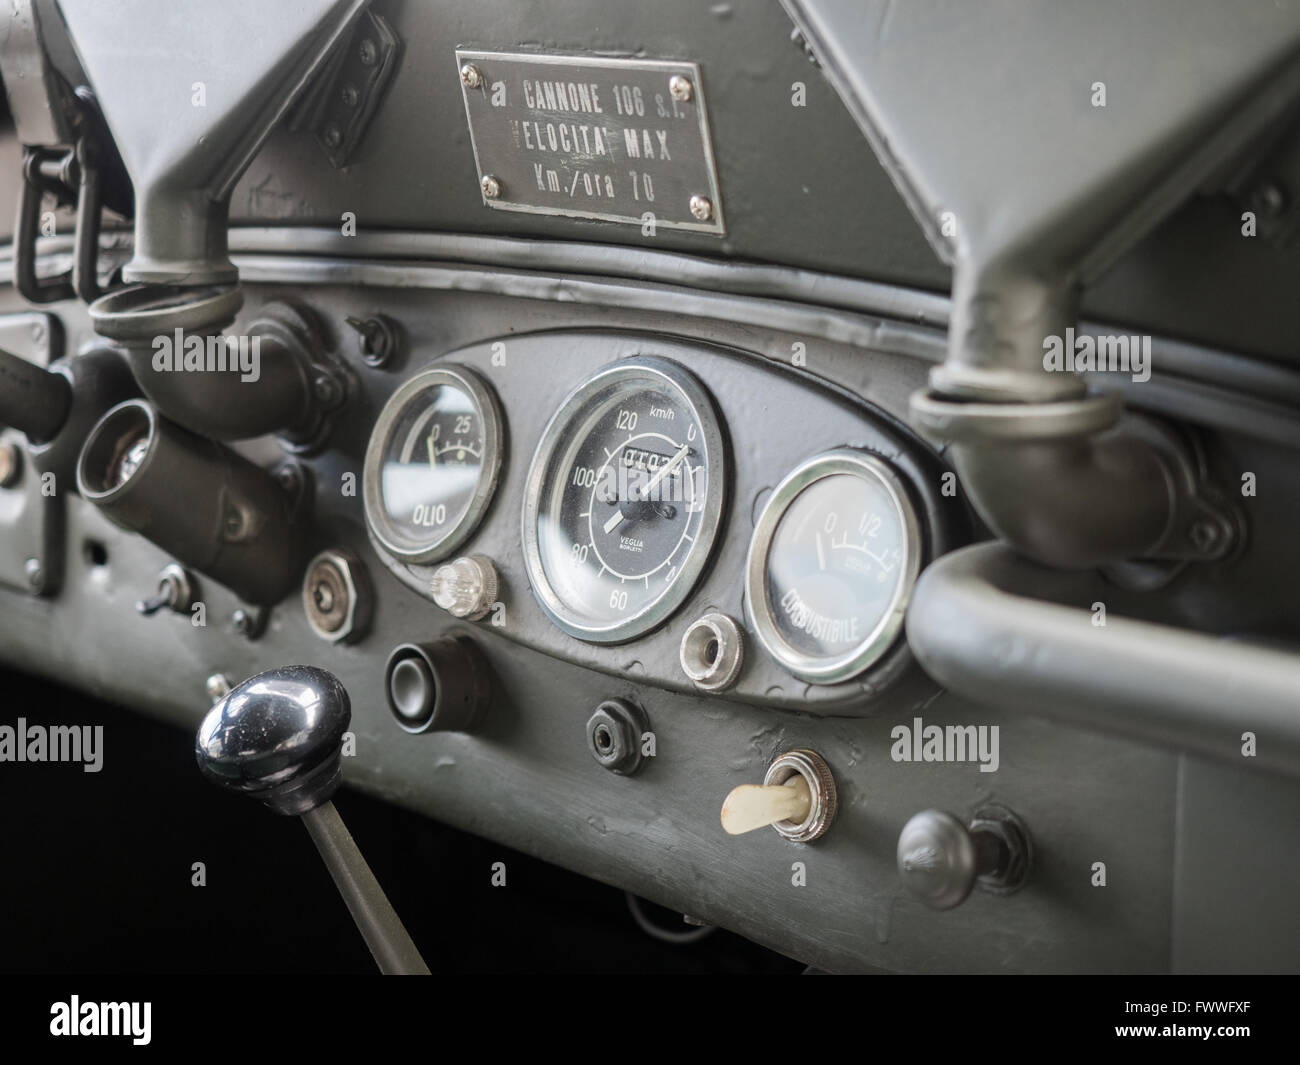 Dashboard detail of an old military jeep of World War II. Stock Photo